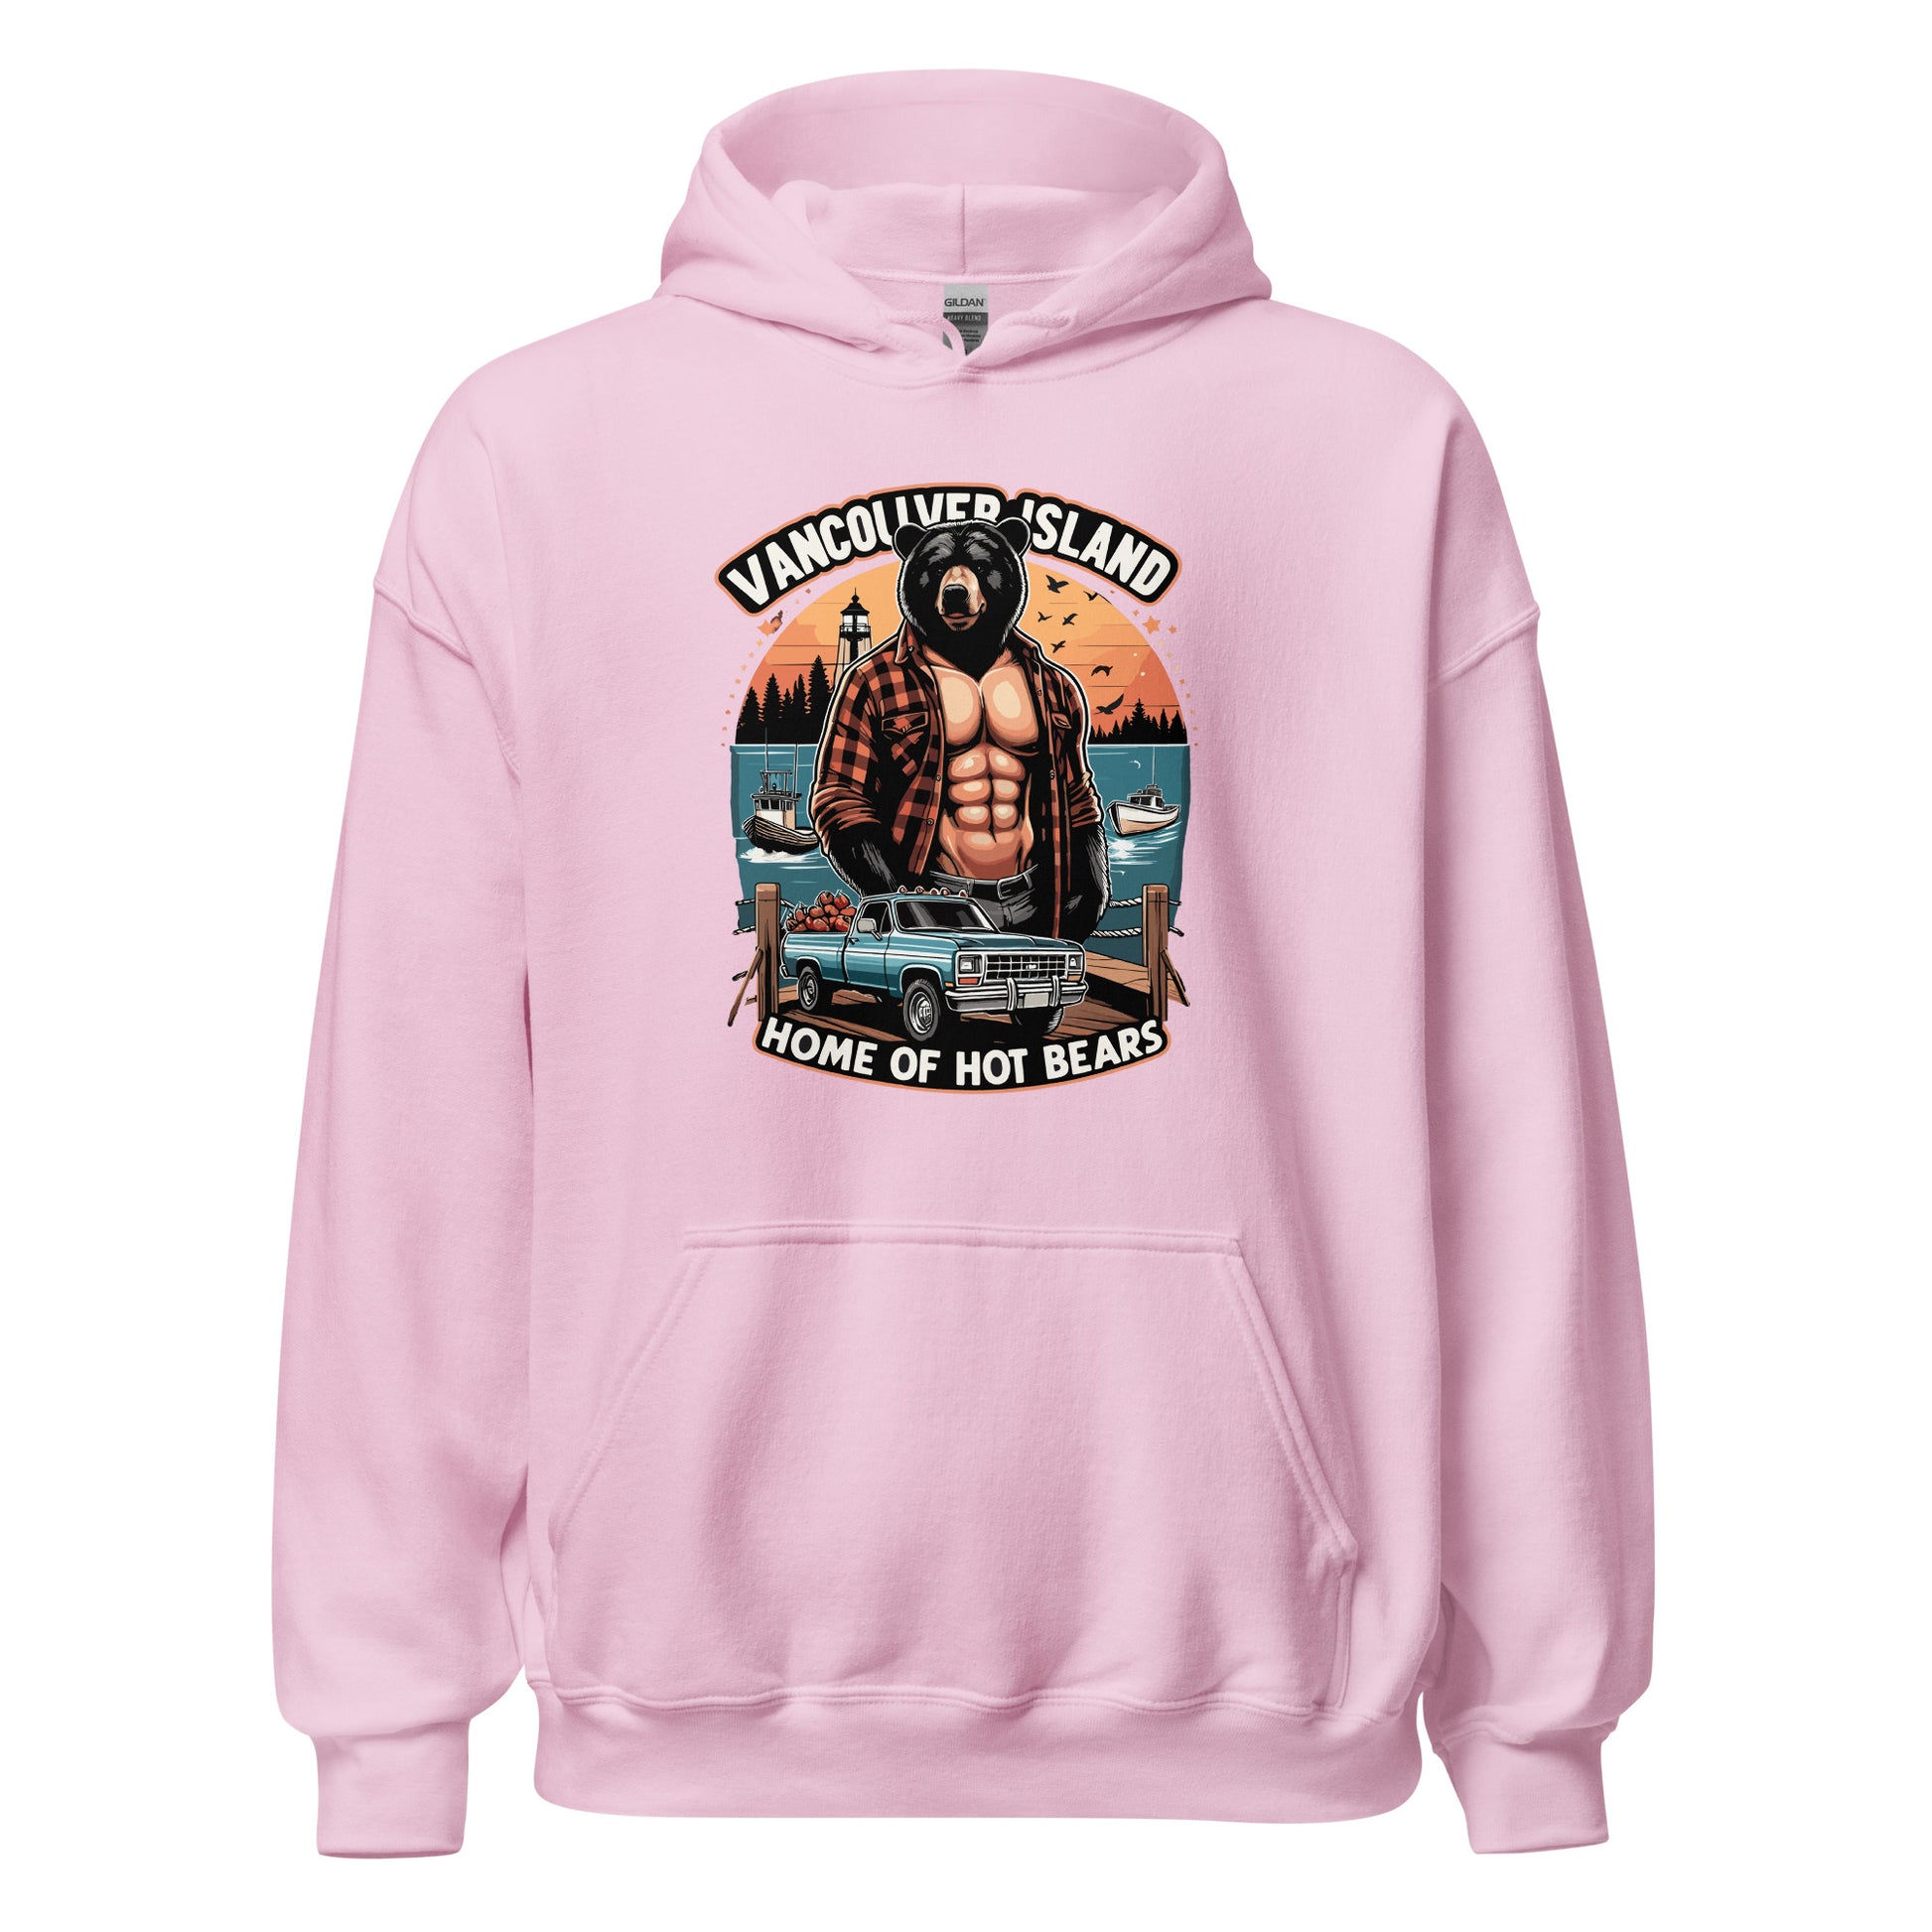 Hoodie printed with Vancouver Island Home of Hot Bears text with picture of a shirtless man with a bear head and truck on a dock by the ocean. Printed on hoodie by Whistler Shirts